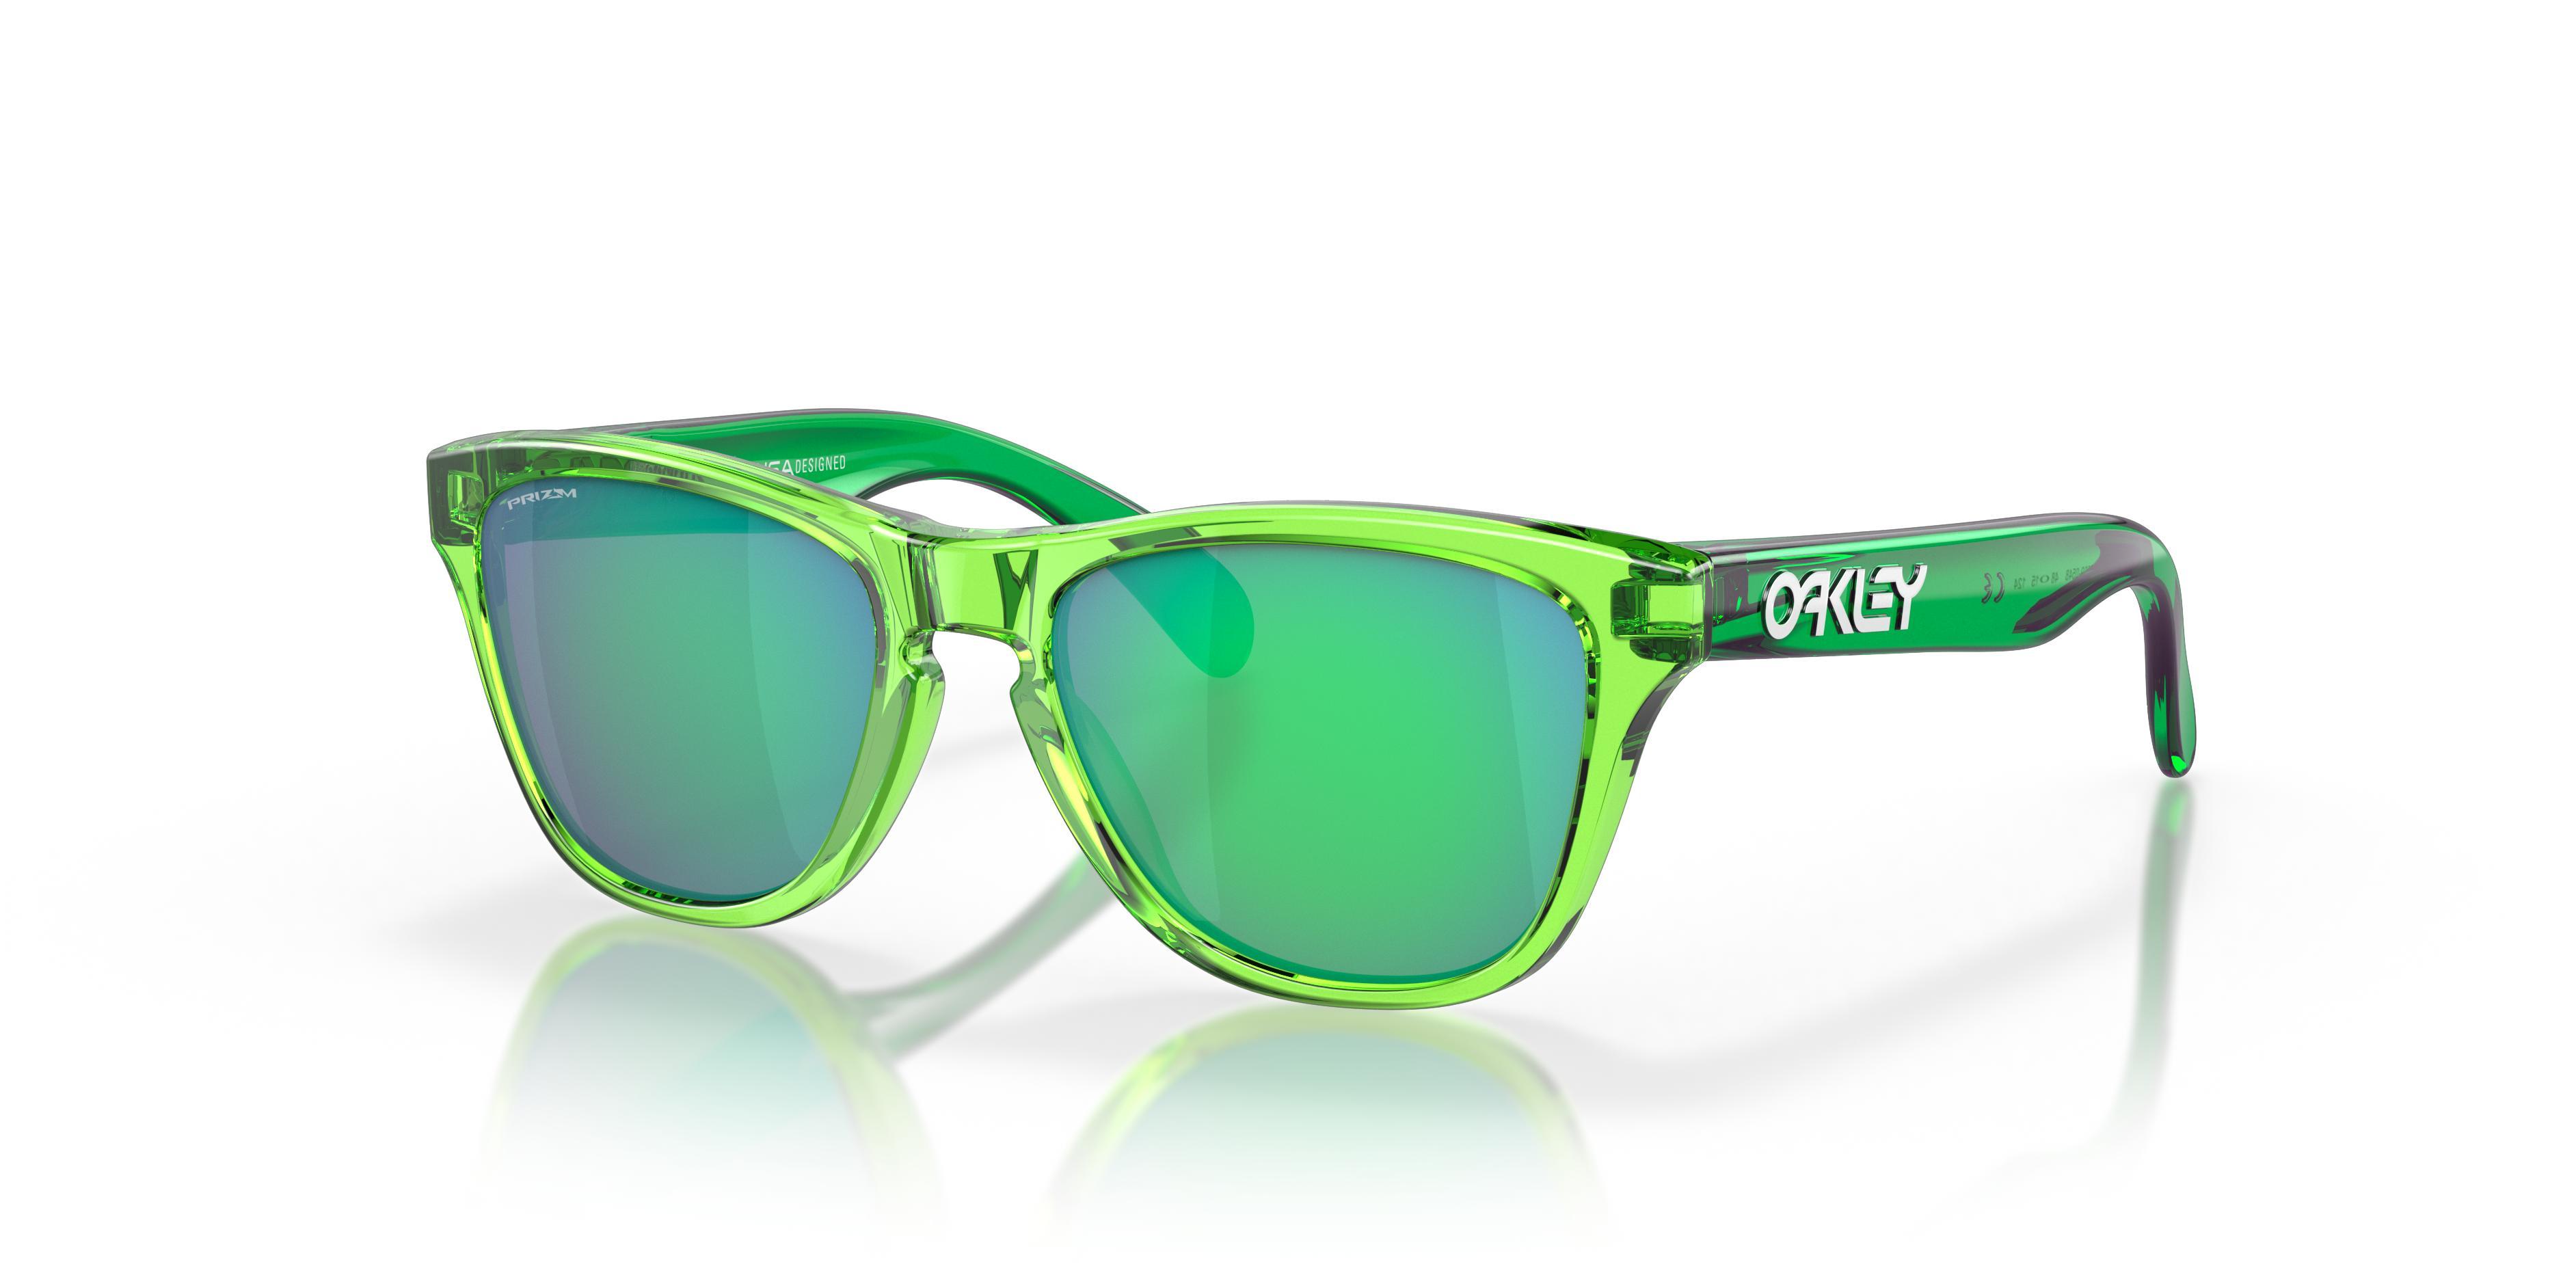 Oakley Frogskins 48mm Small Square Sunglasses Product Image